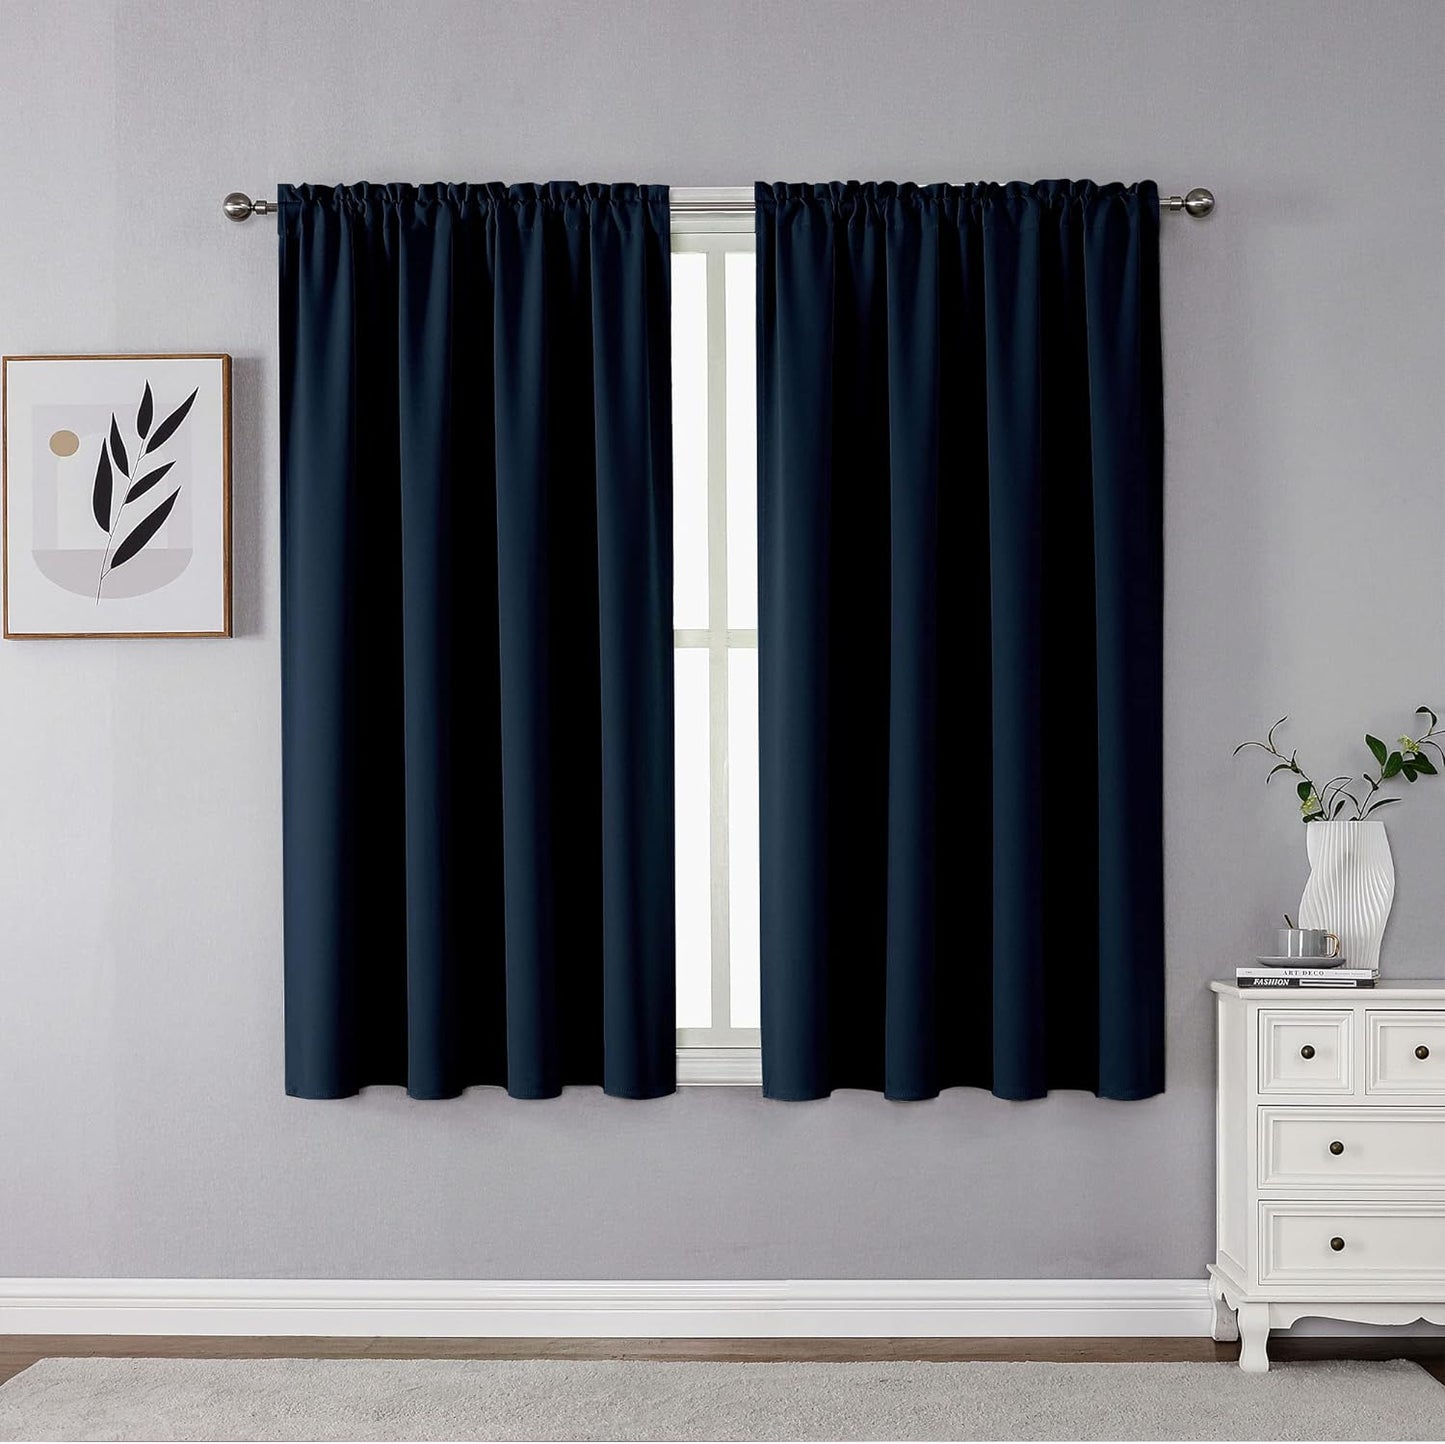 CUCRAF Blackout Curtains 84 Inches Long for Living Room, Light Beige Room Darkening Window Curtain Panels, Rod Pocket Thermal Insulated Solid Drapes for Bedroom, 52X84 Inch, Set of 2 Panels  CUCRAF Navy Blue 52W X 54L Inch 2 Panels 